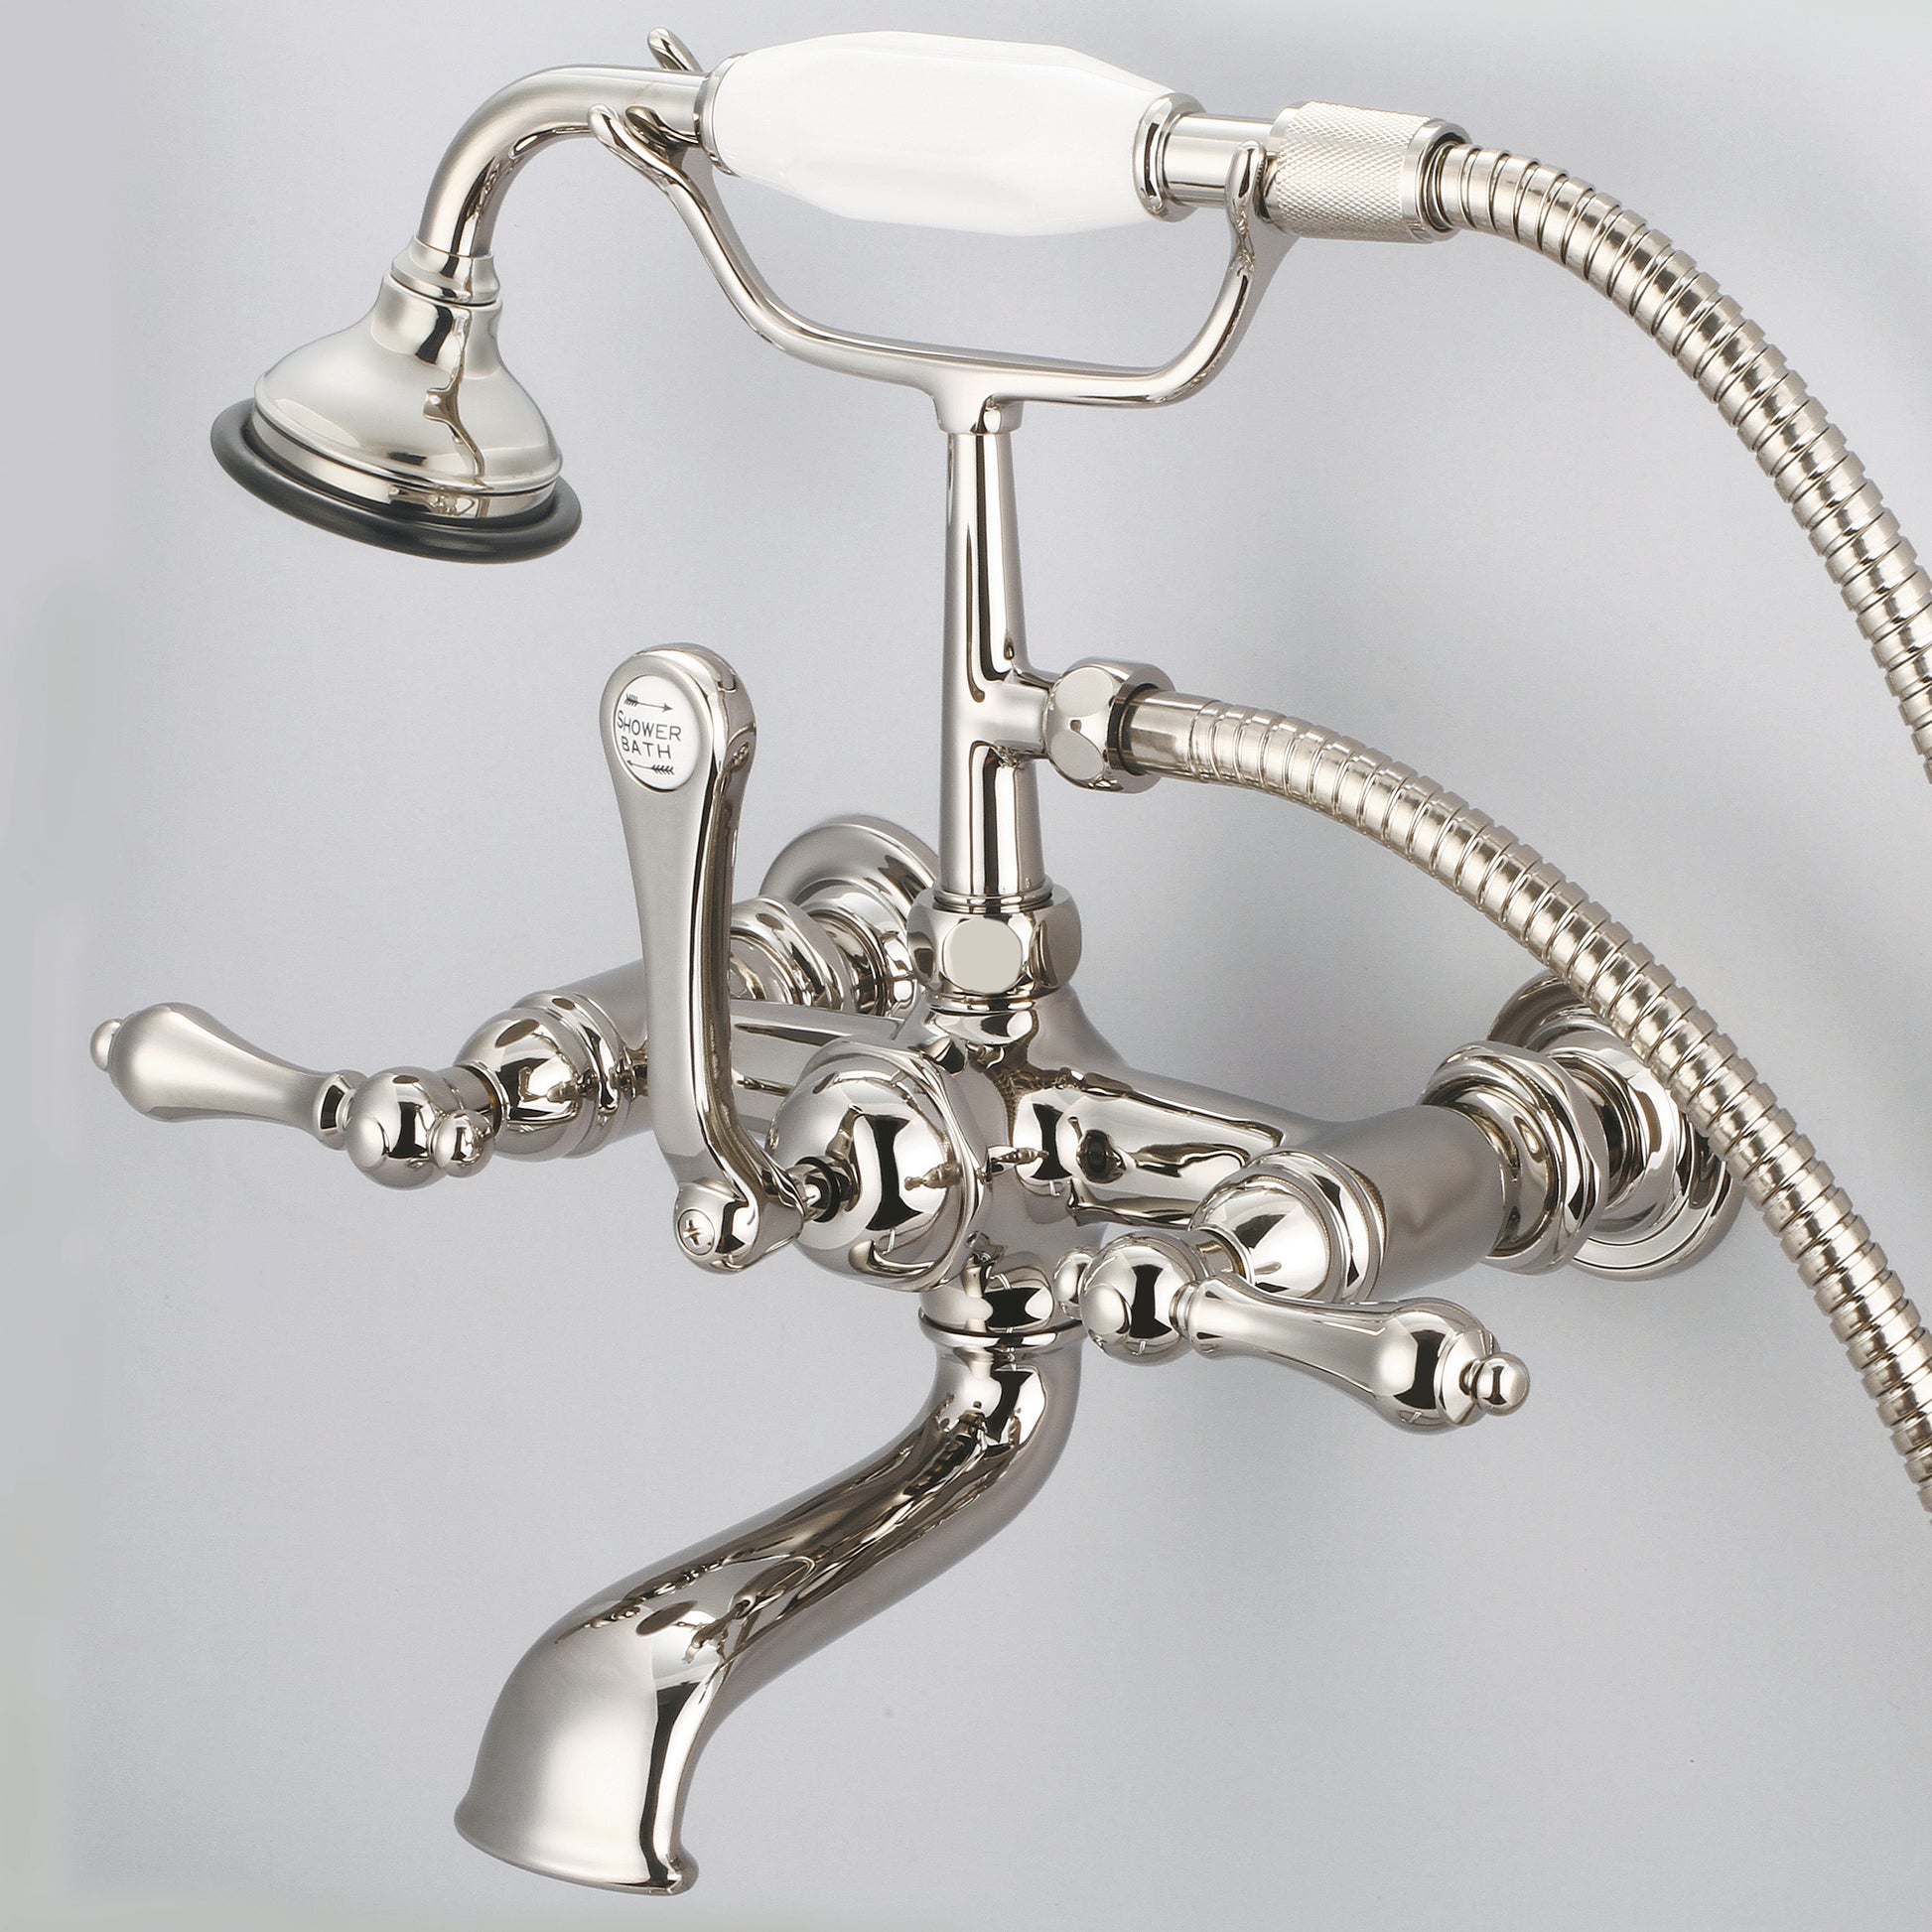 Vintage Classic 7" Spread Wall Mount Tub Faucet With Straight Wall Connector & Handheld Shower in Polished Nickel Finish, With Metal Lever Handles Without Labels